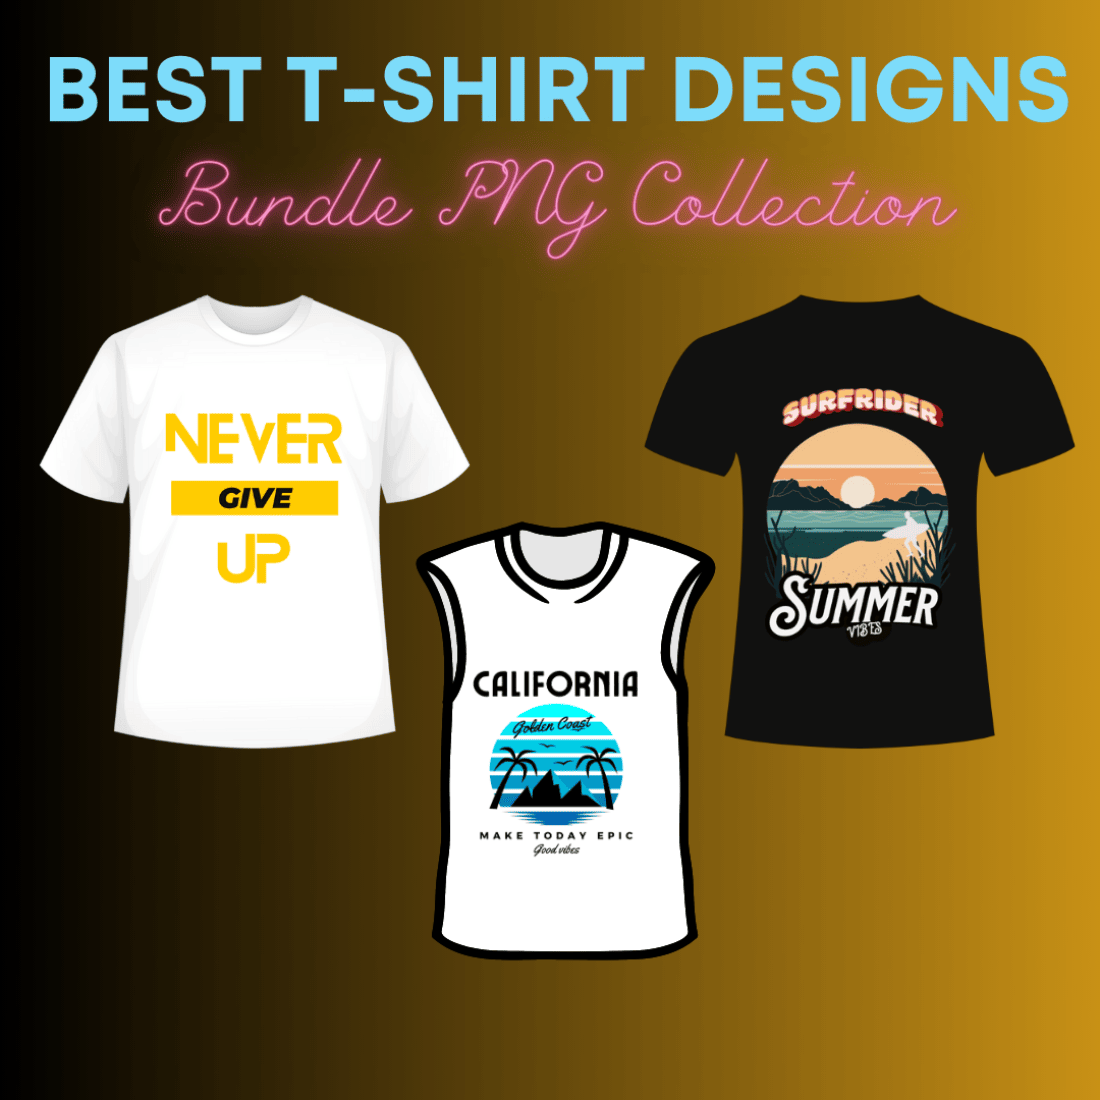 3 Best T-shirt Designs Bundle PNG Collection cover image.